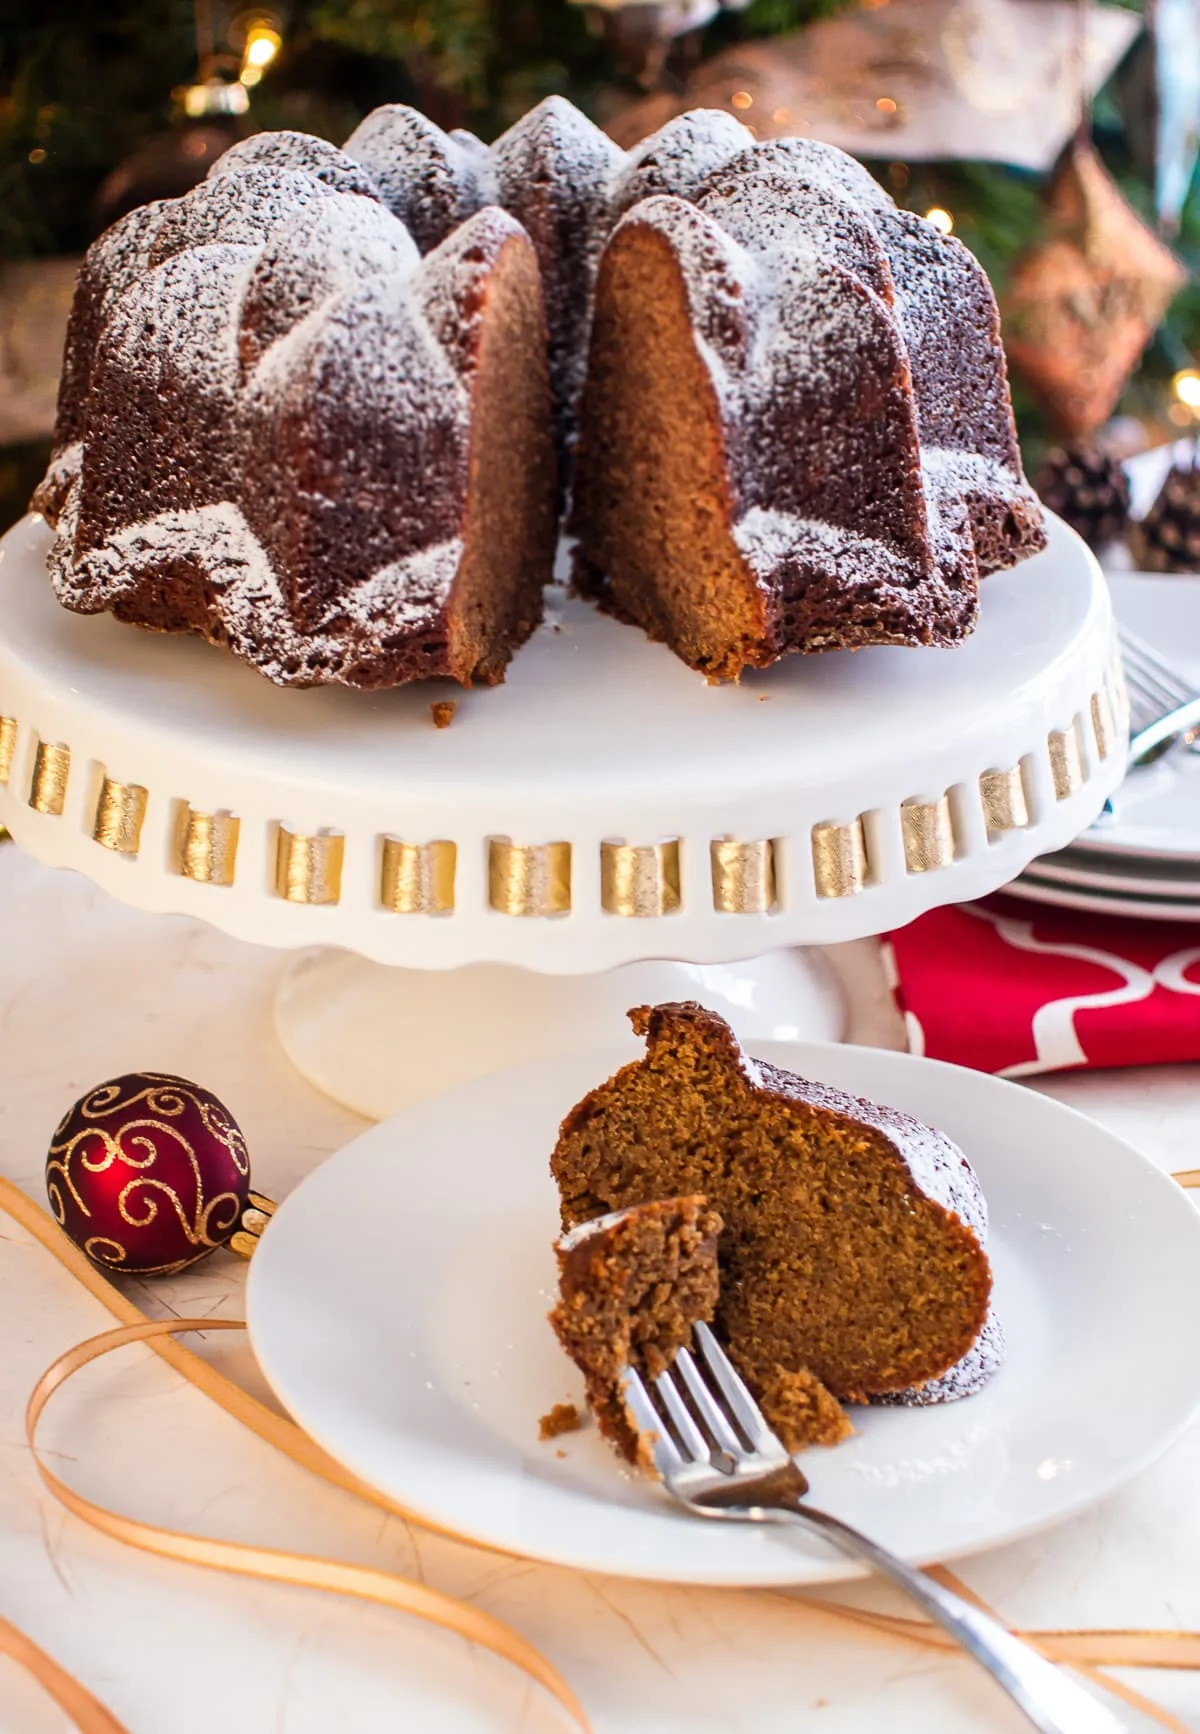 Gingerbread cake on cake stand.